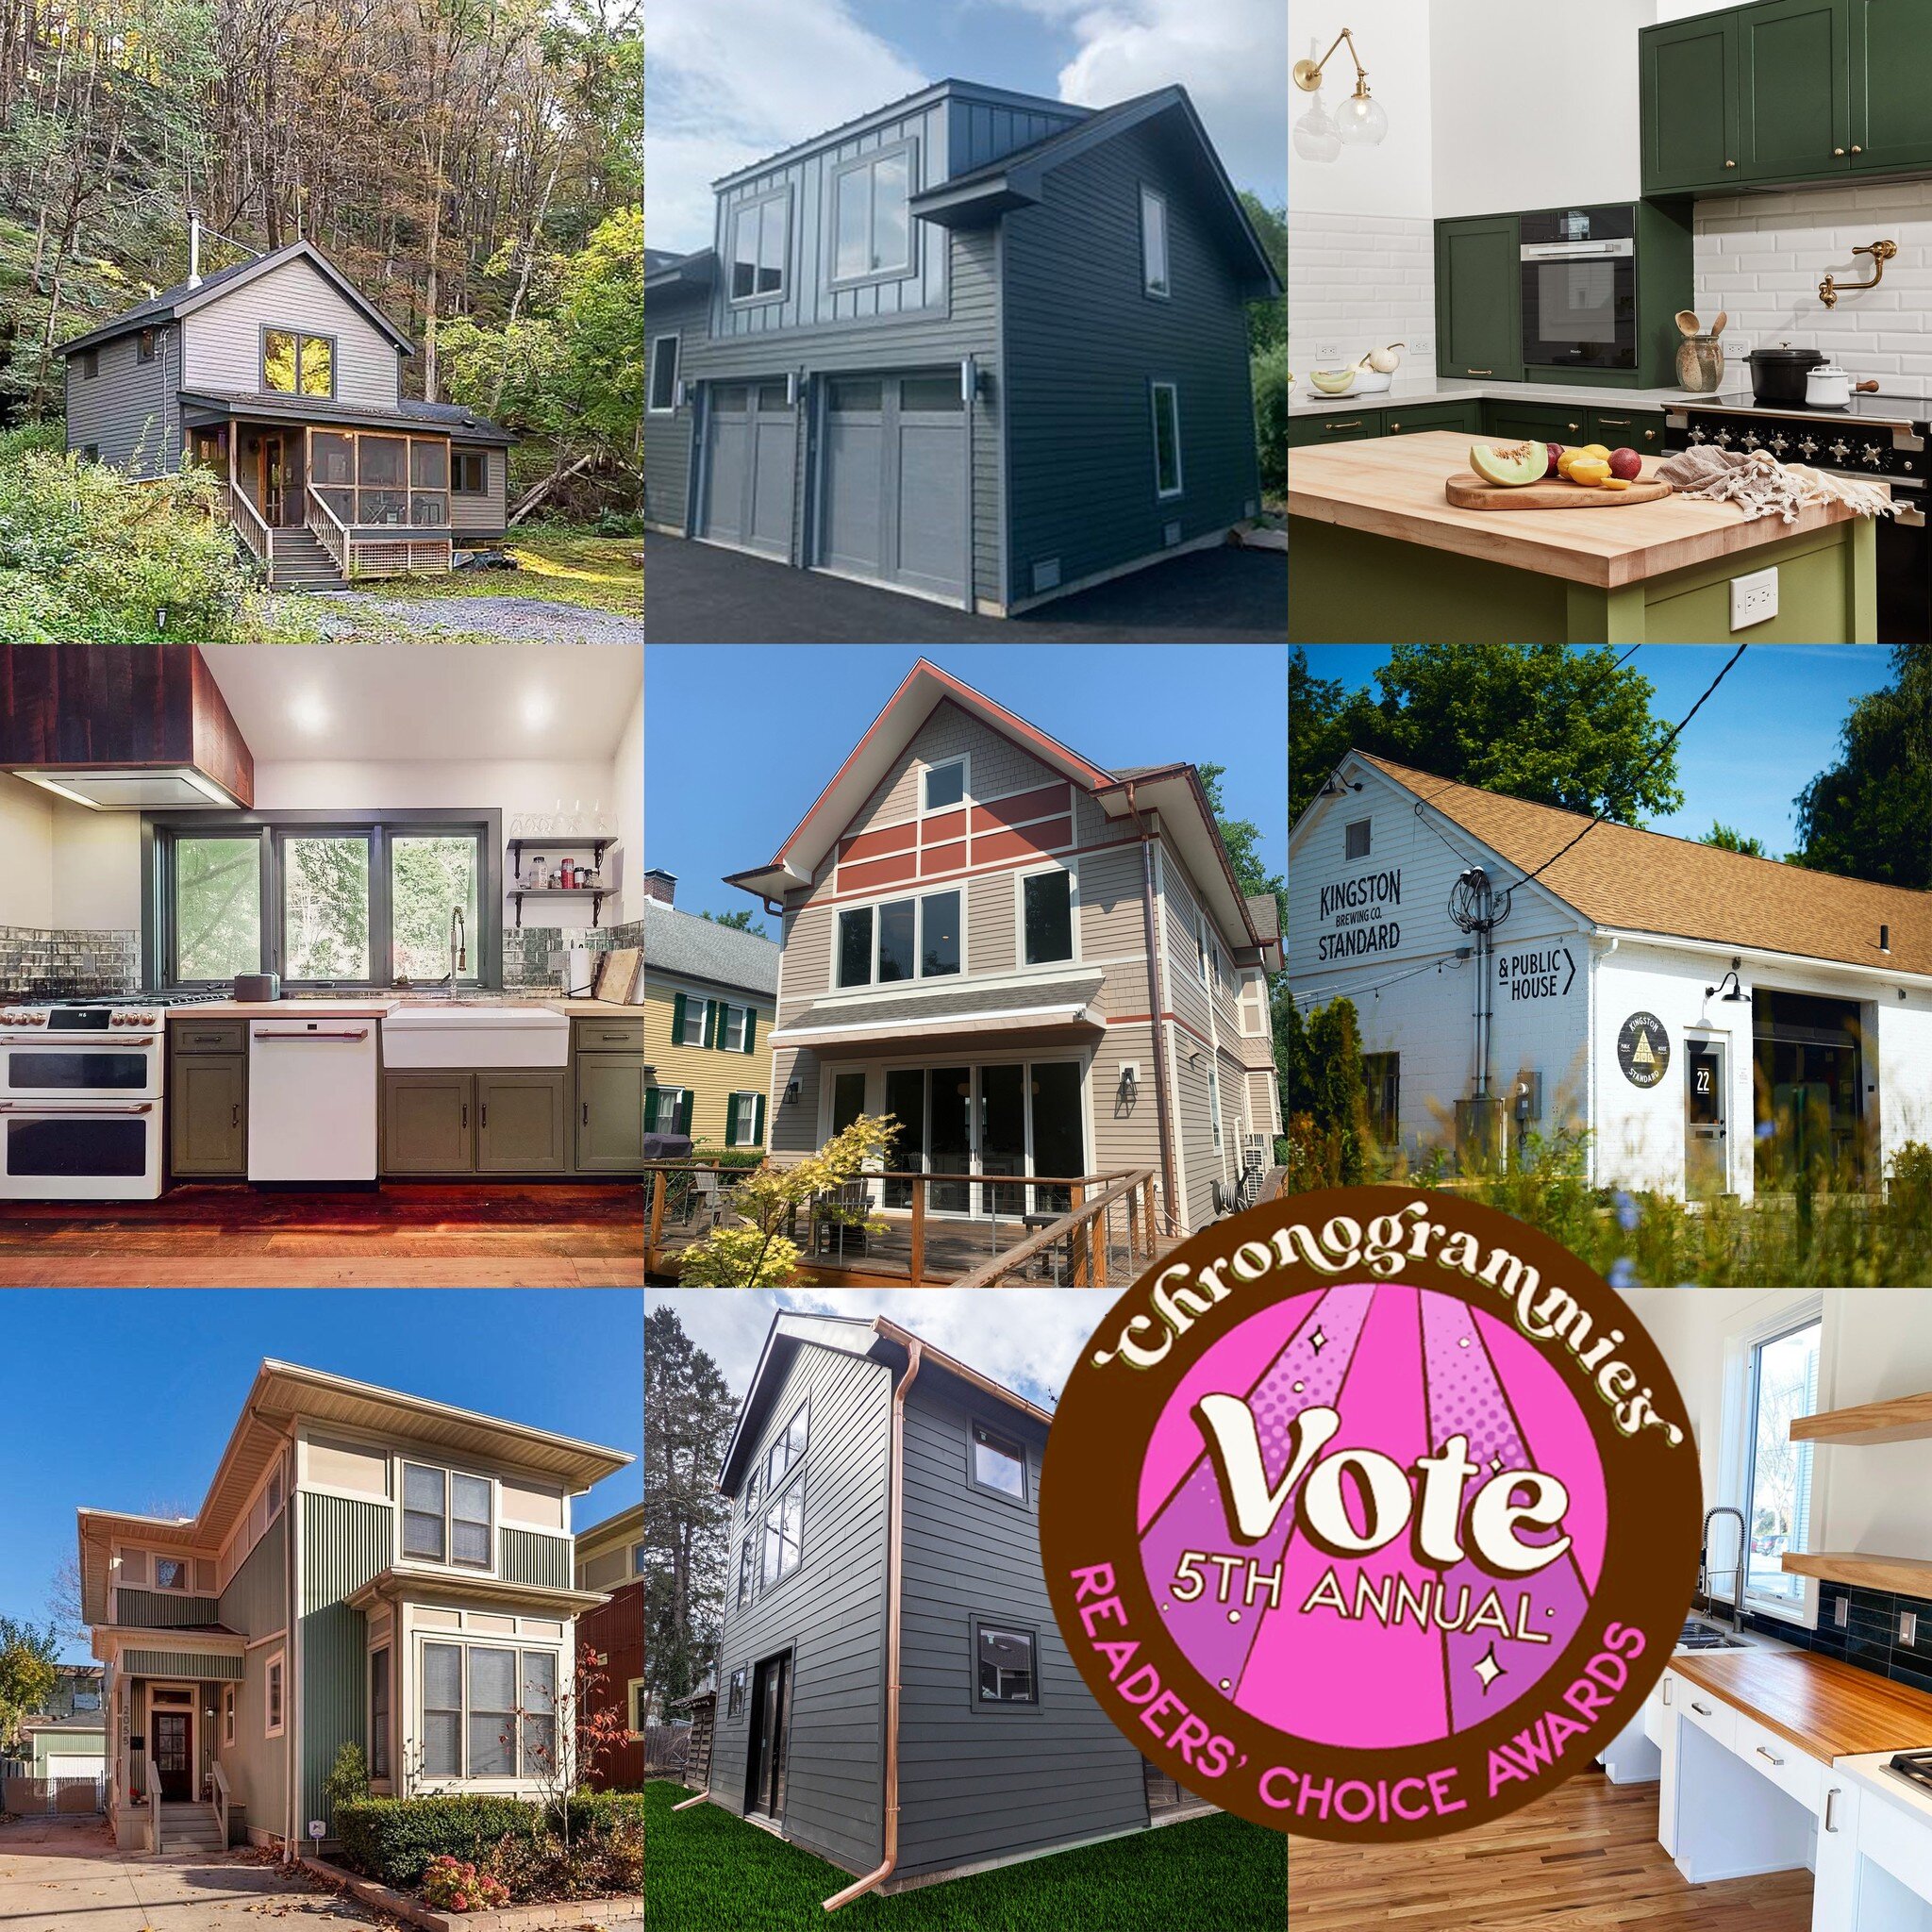 Exciting news! Loj Architecture has made it to the FINAL ROUND of voting for Best Architecture Firm in the Hudson Valley in @chronogram&rsquo;s 5th annual Chronogrammies Reader&rsquo;s Choice Awards for a second year in a row. Your support is crucial